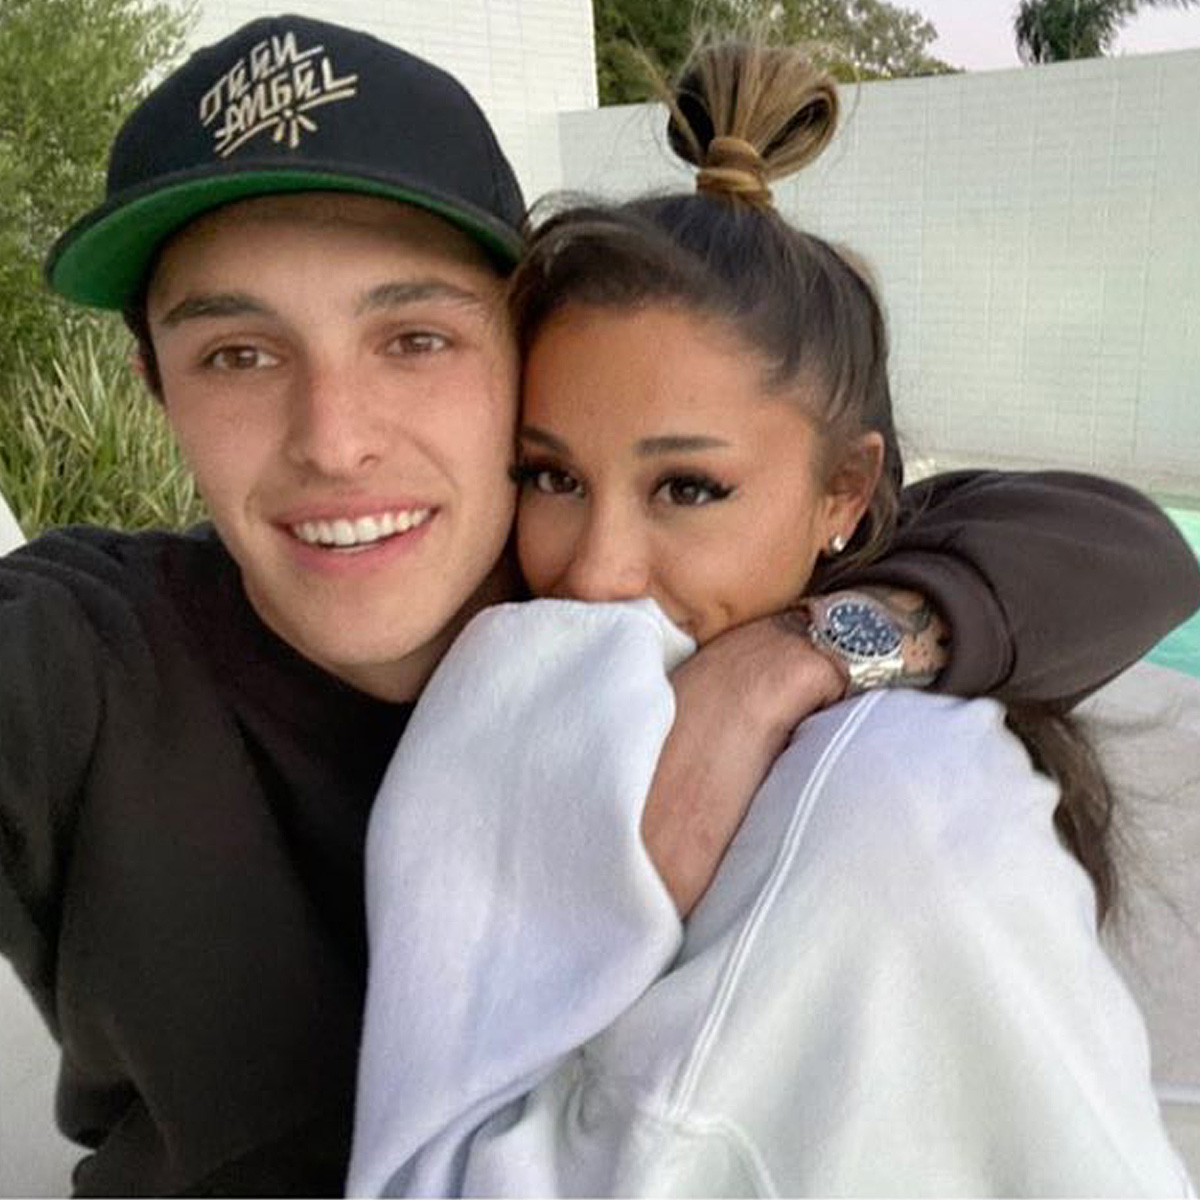 Ariana Grande and Dalton Gomez Break Up After 2 Years of Marriage